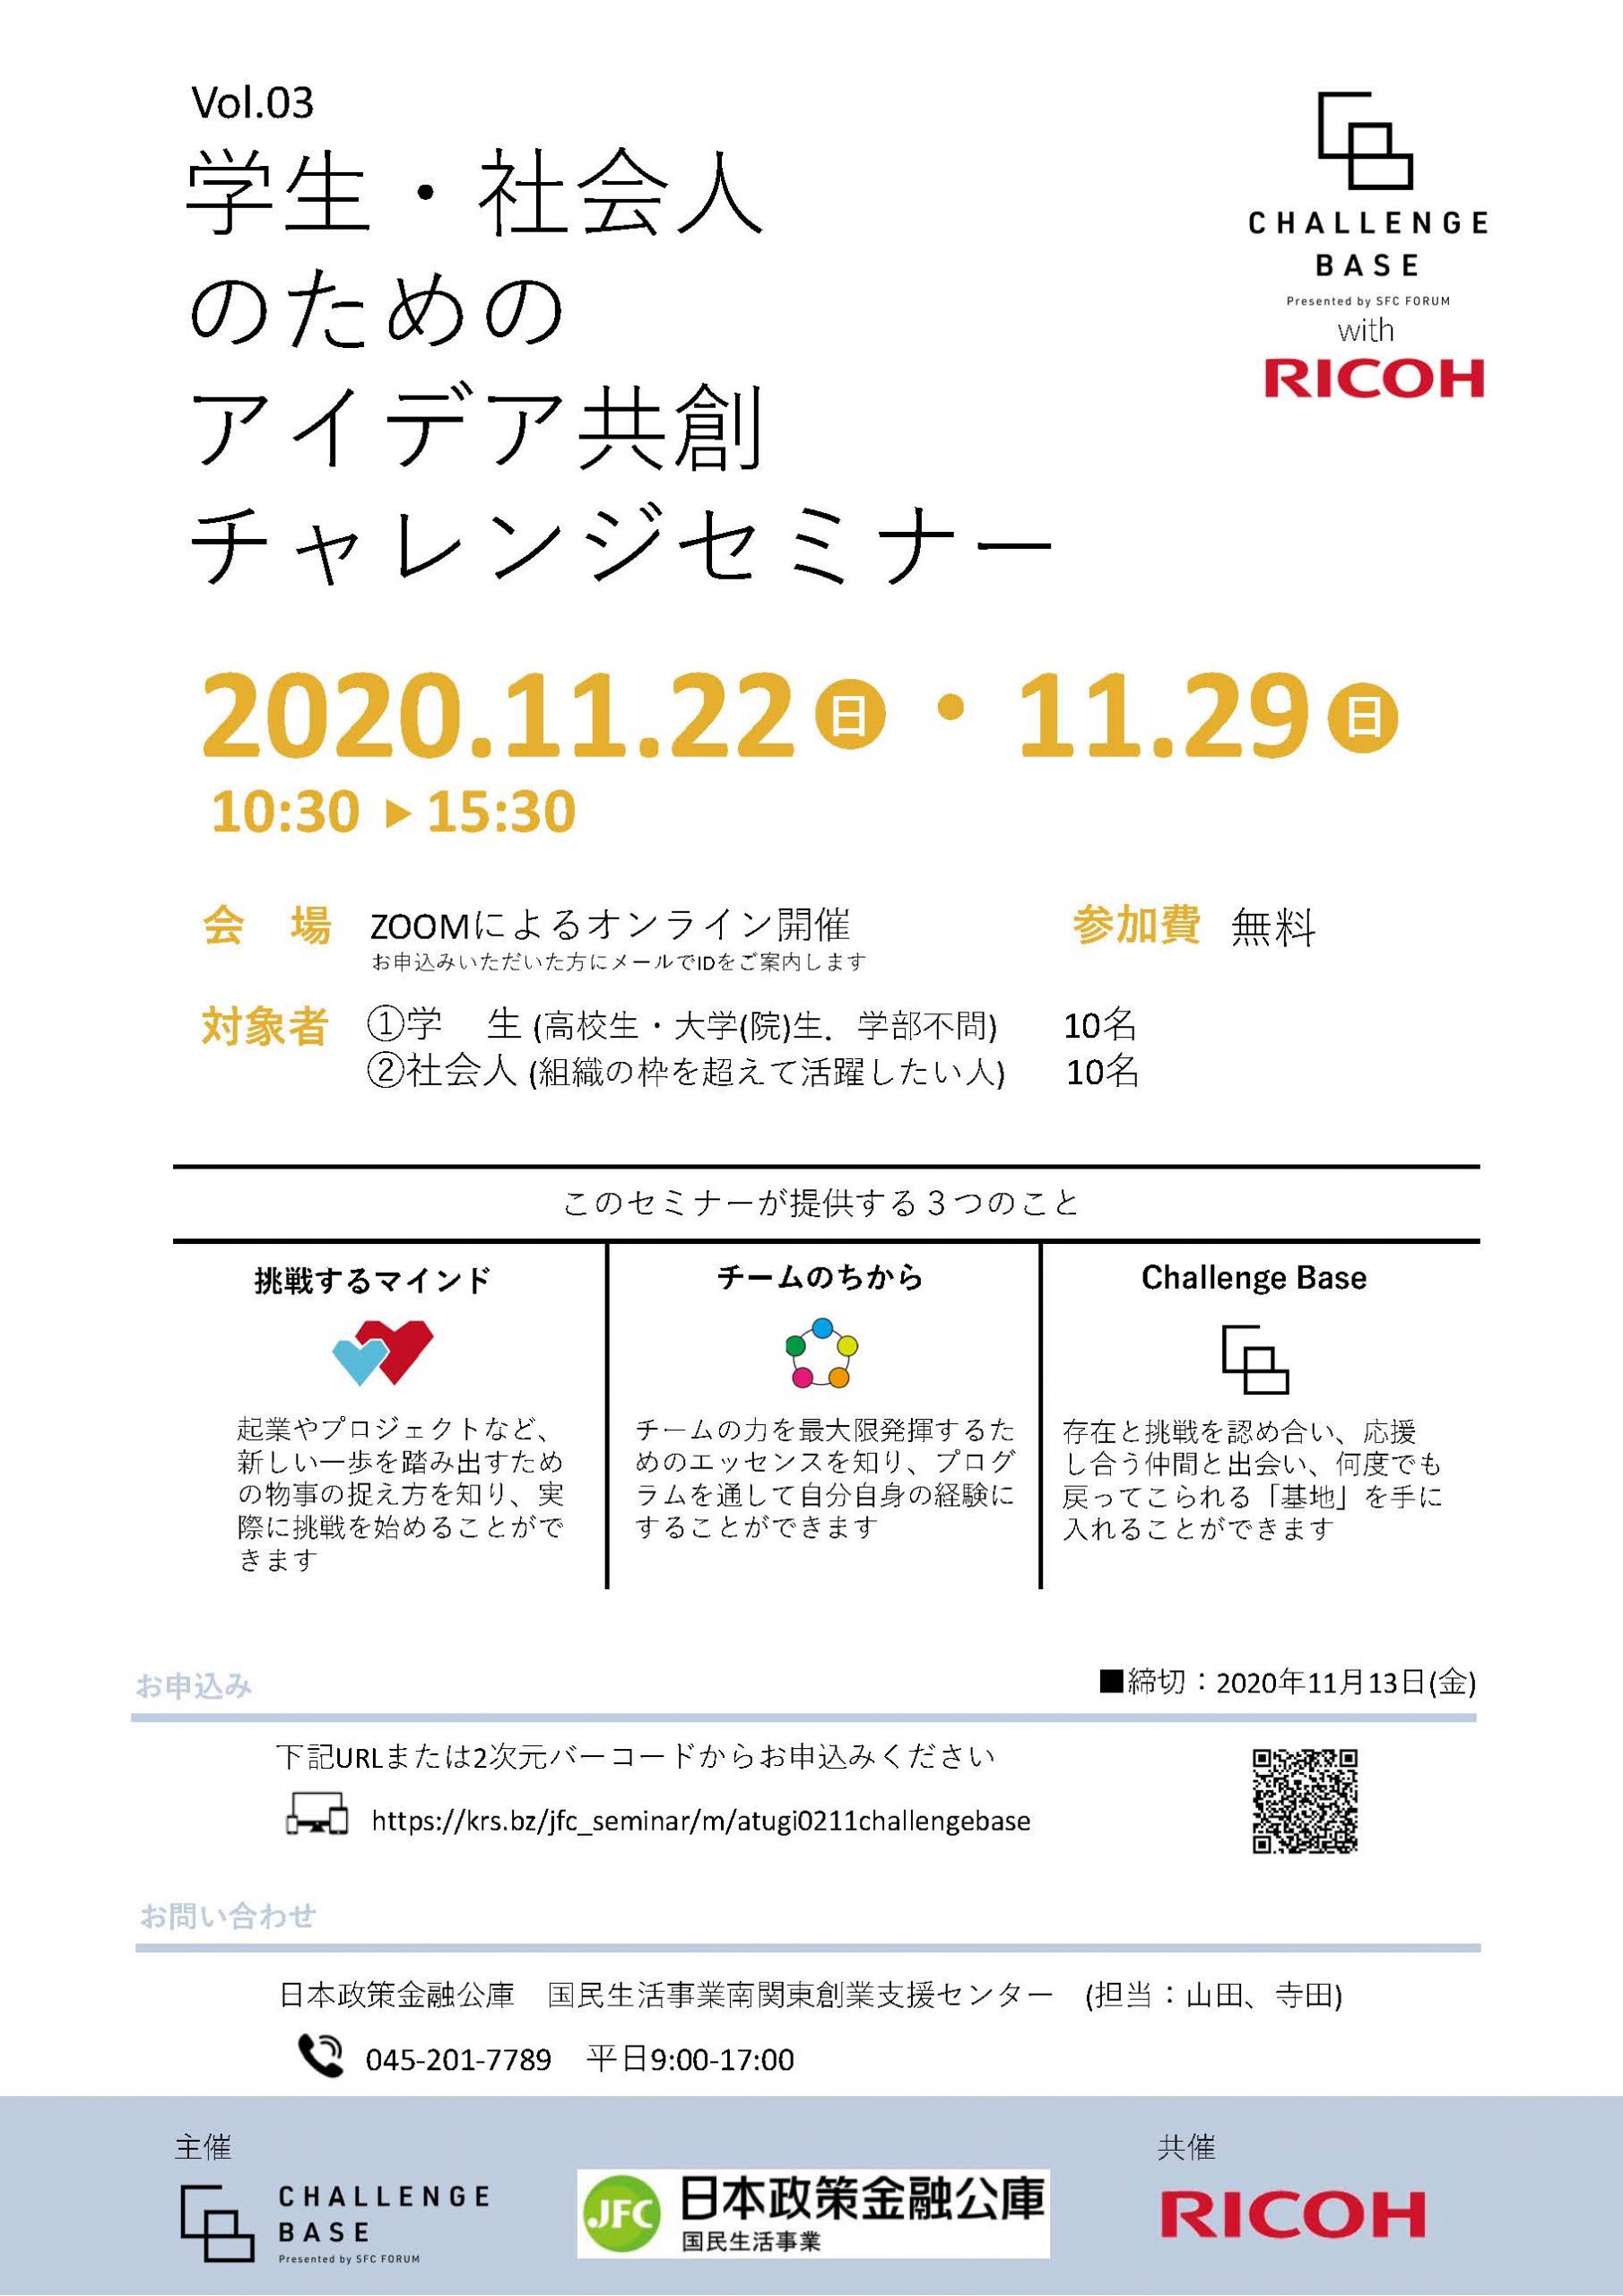 CHALLENGE BASE with RICOH　Vol.03